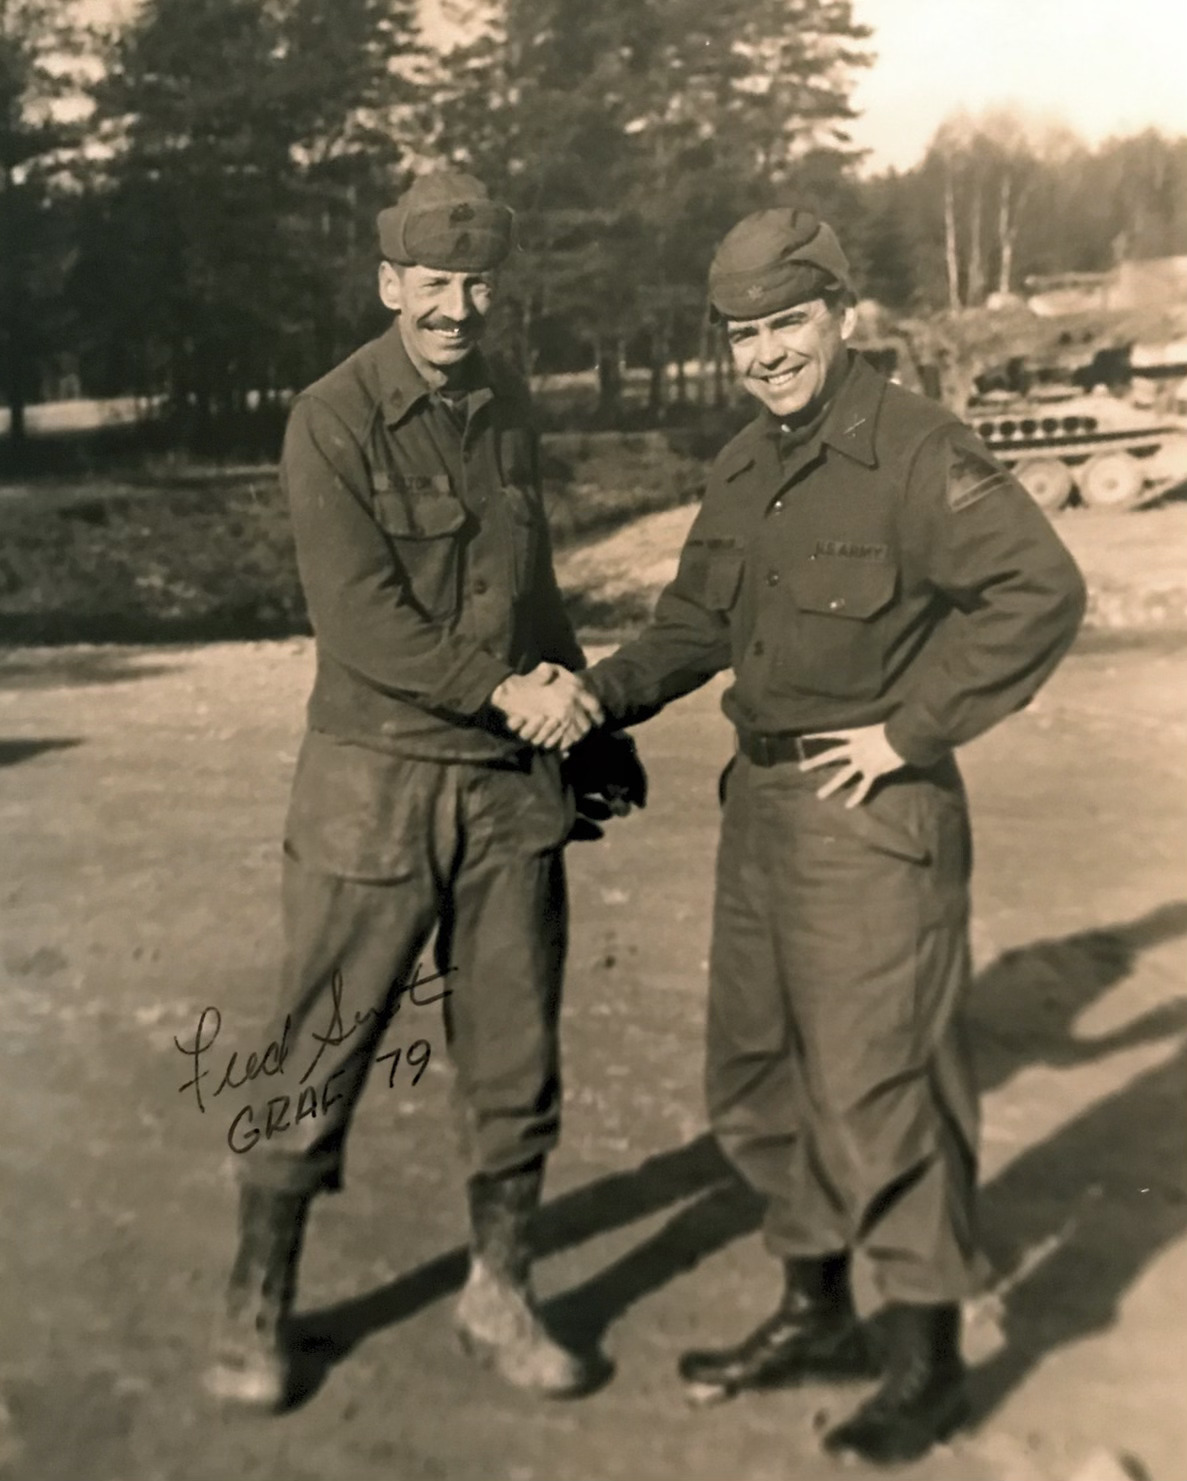 Two U.S. Army soldiers shaking hands